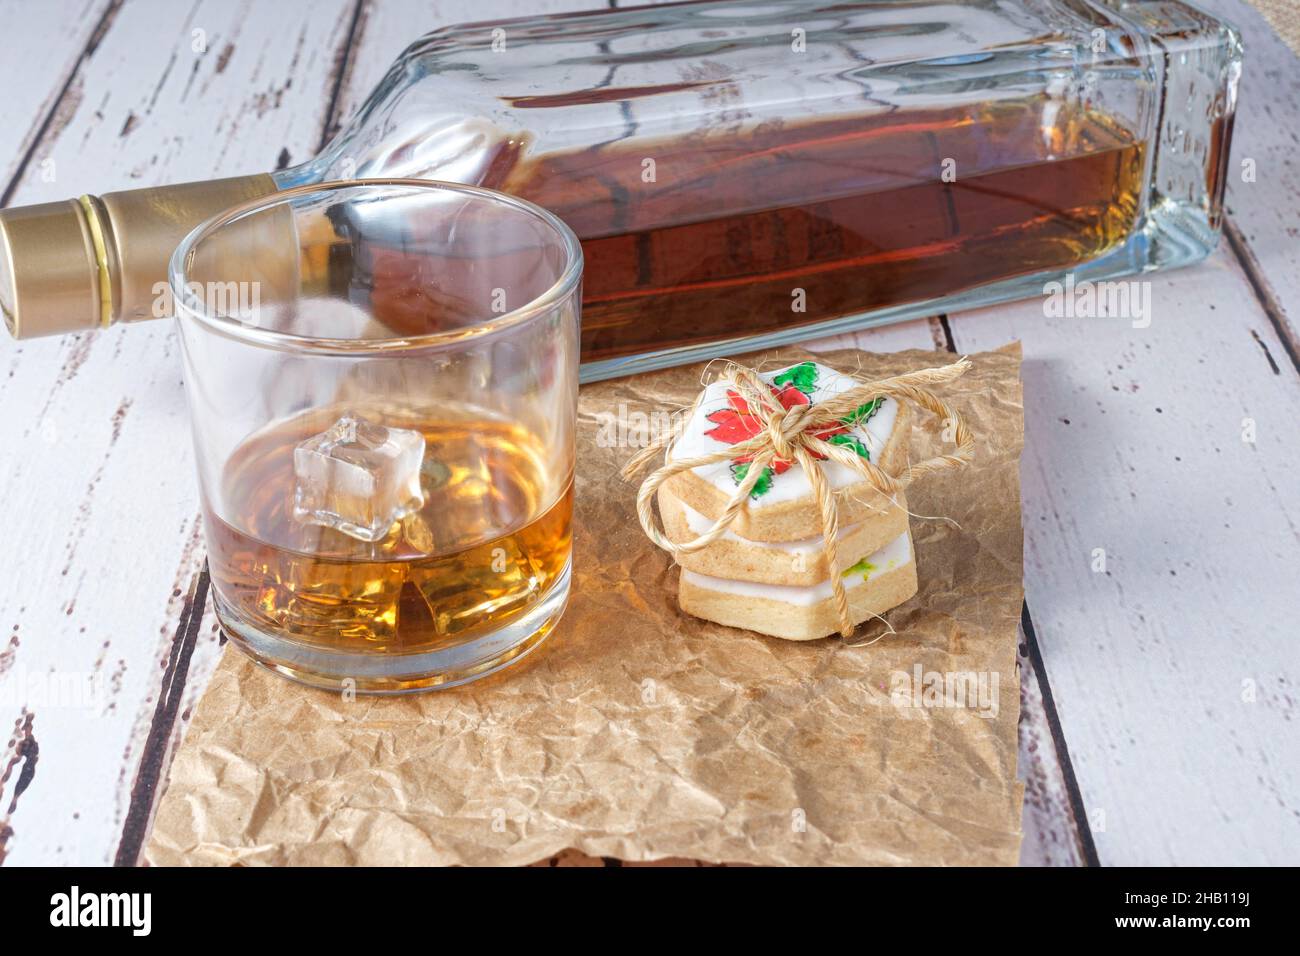 Glass of whiskey with ice on brown paper next to biscuits with a sisal bow. Stock Photo